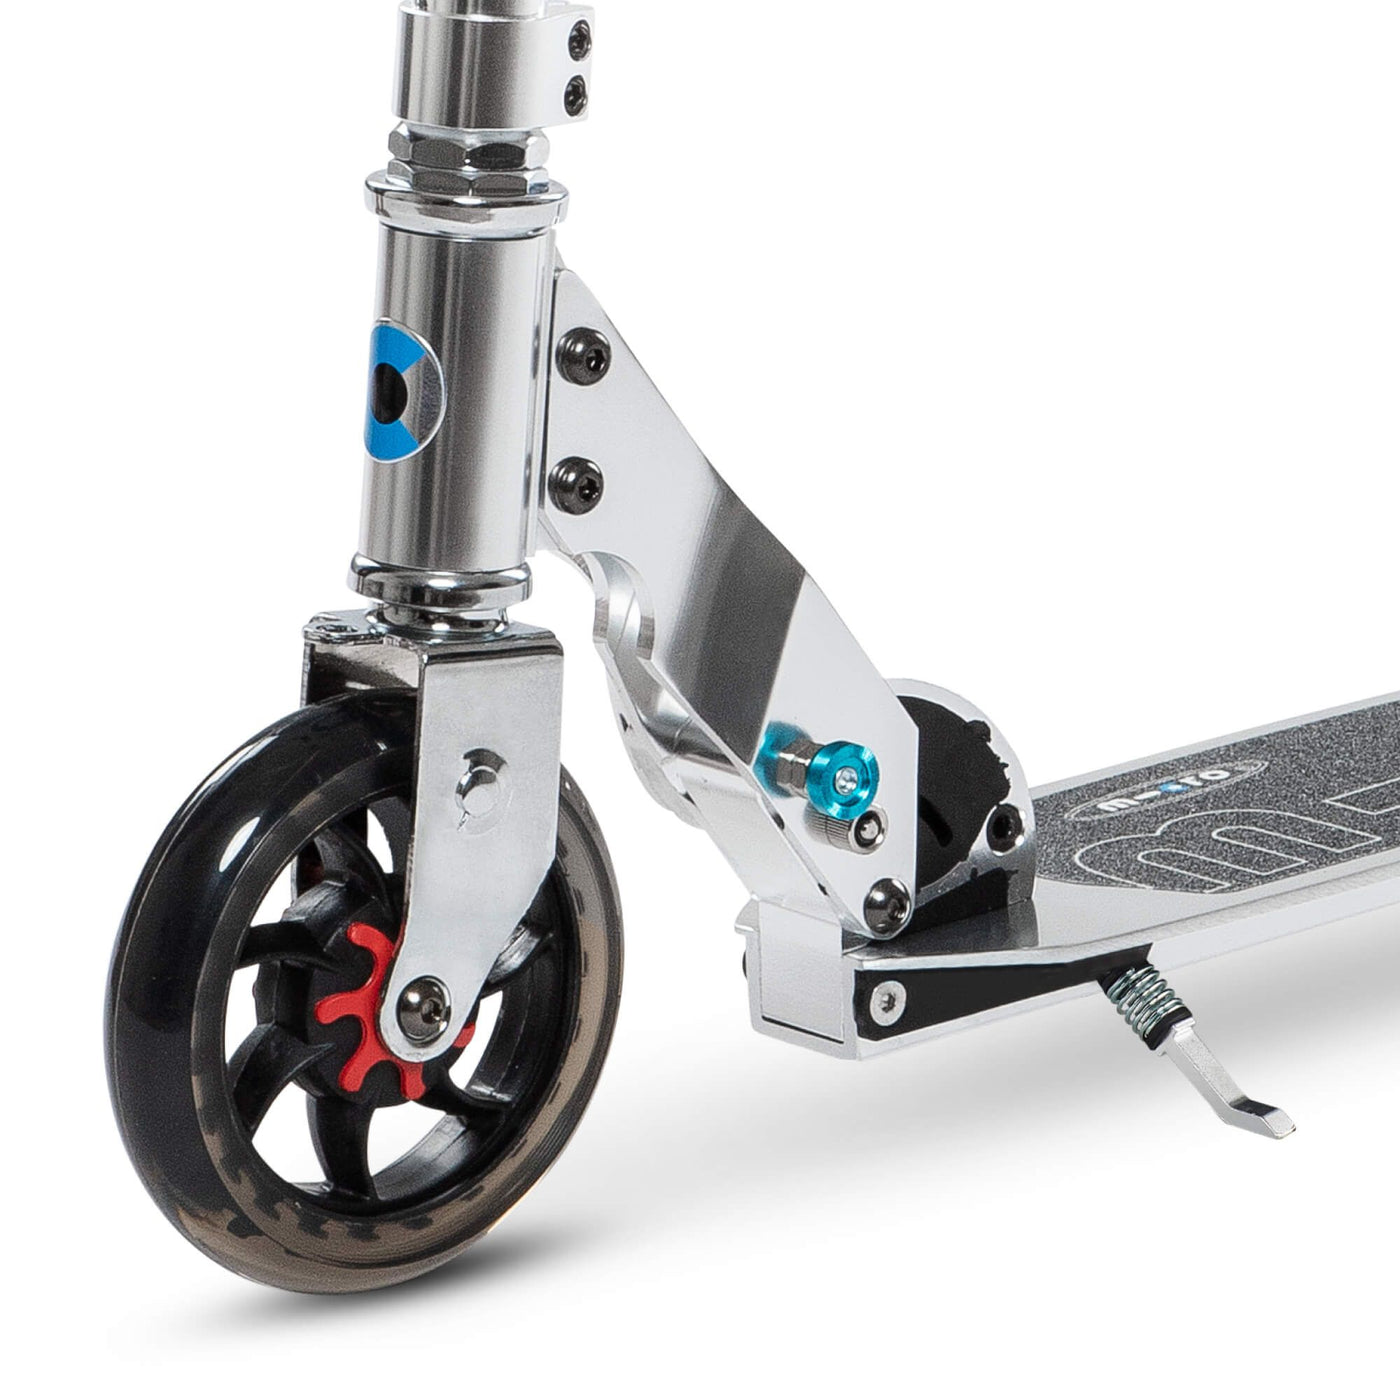 Micro Speed Scooter - Silver